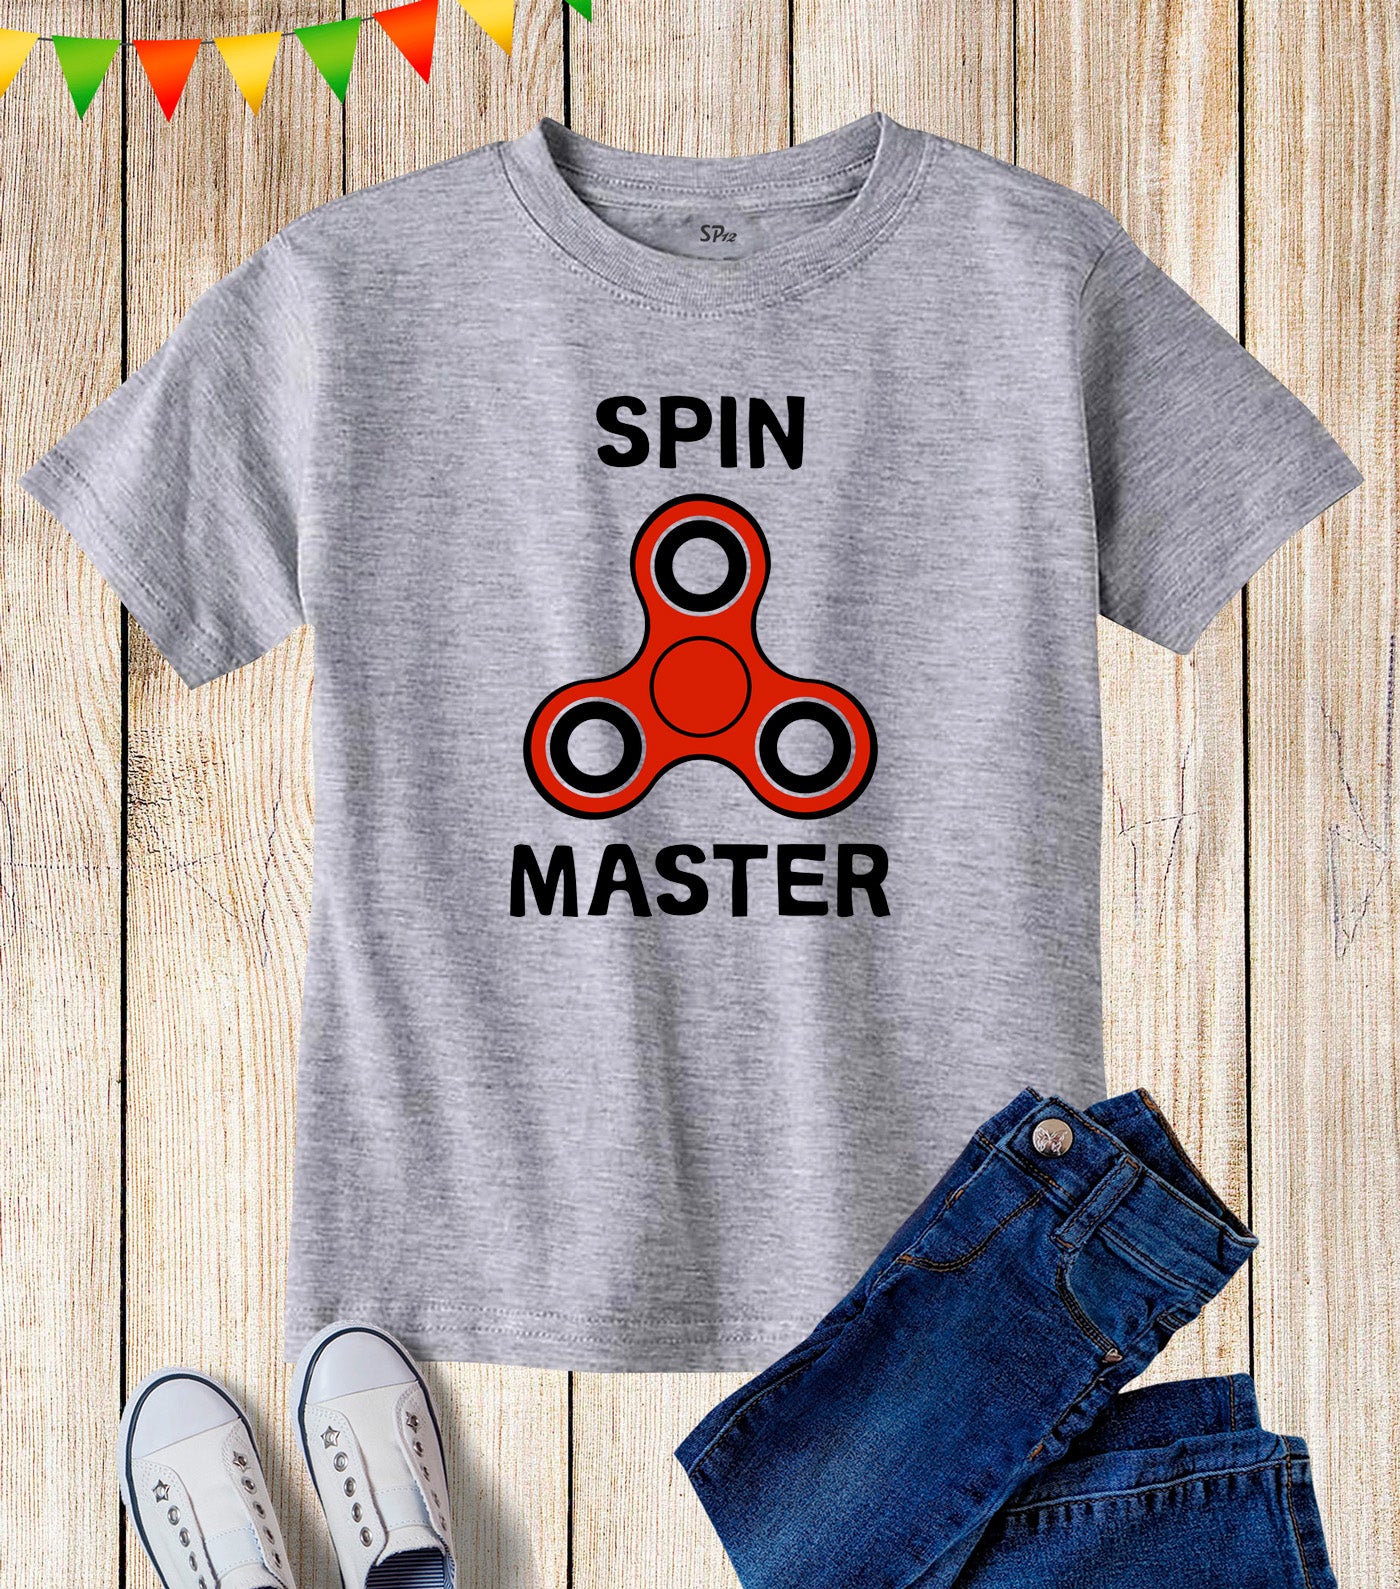 Spin Master Funny Kids T Shirt